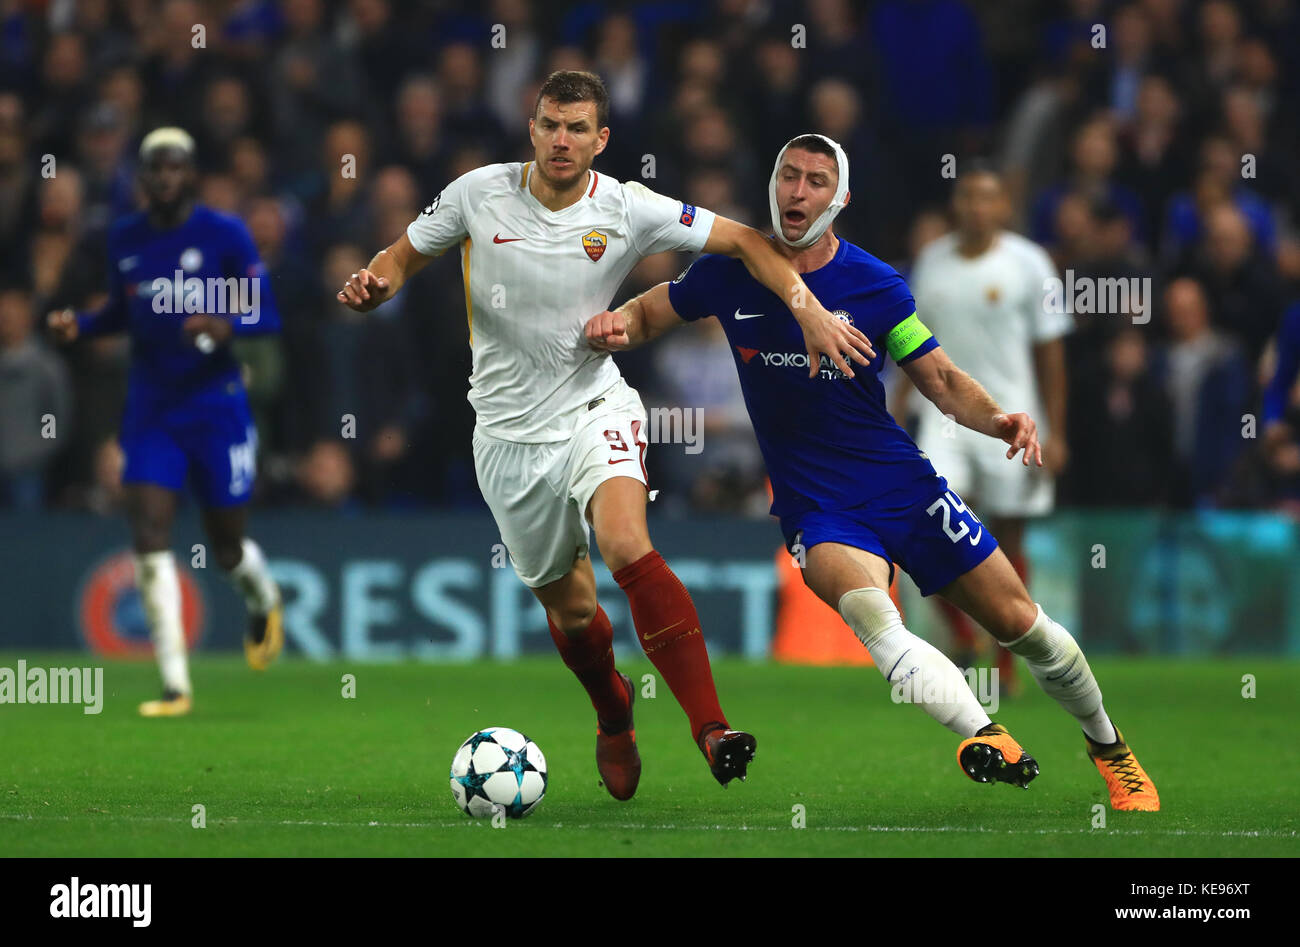 Roma's Edin Dzeko (left) and Chelsea's Gary Cahill battle for the ball during the UEFA Champions League, Group C match at Stamford Bridge, London. Stock Photo